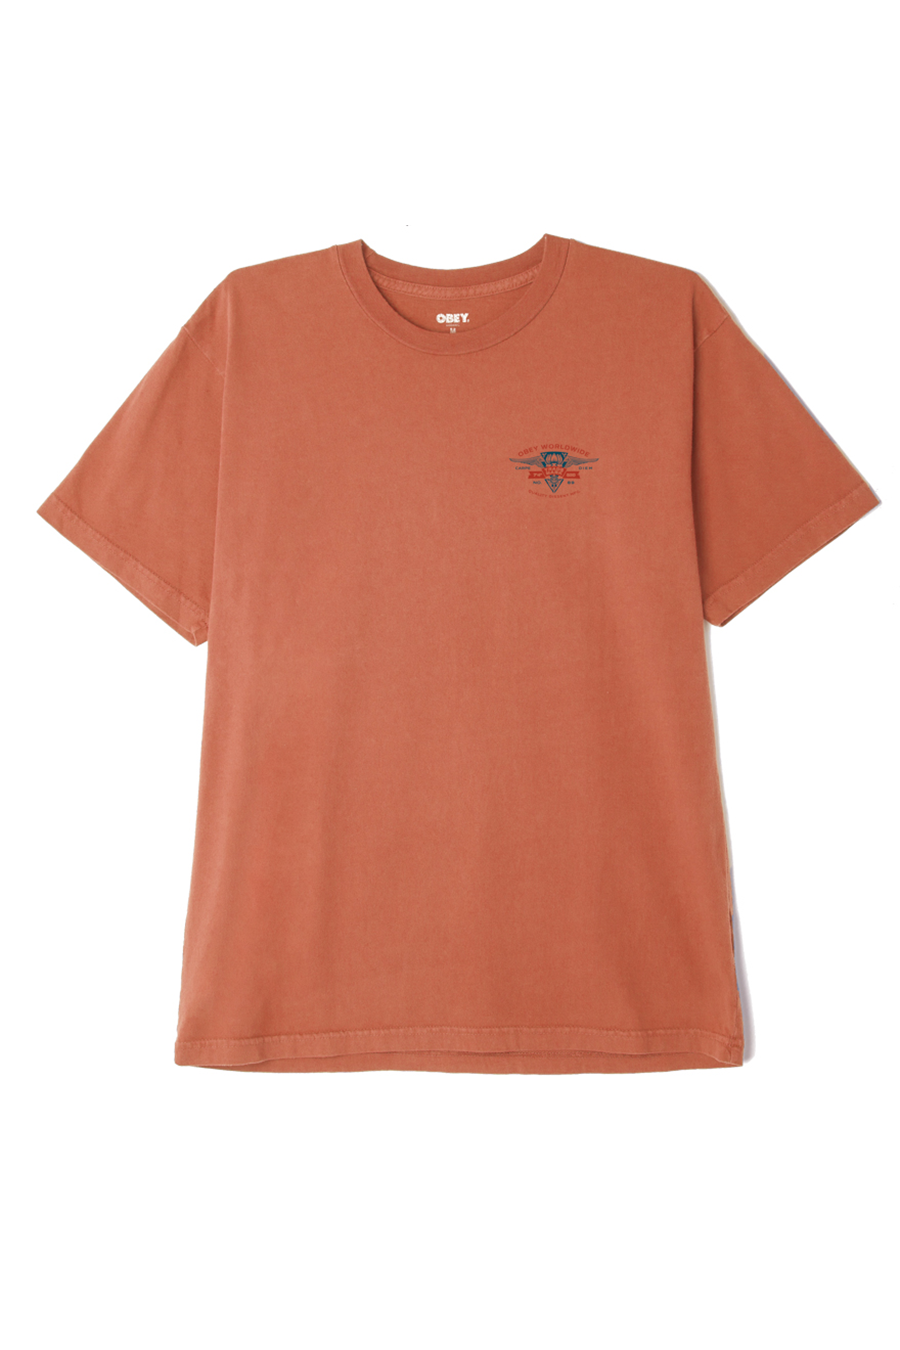 Winged Lotus Organic Tee | Copper Coin - Main Image Number 2 of 2